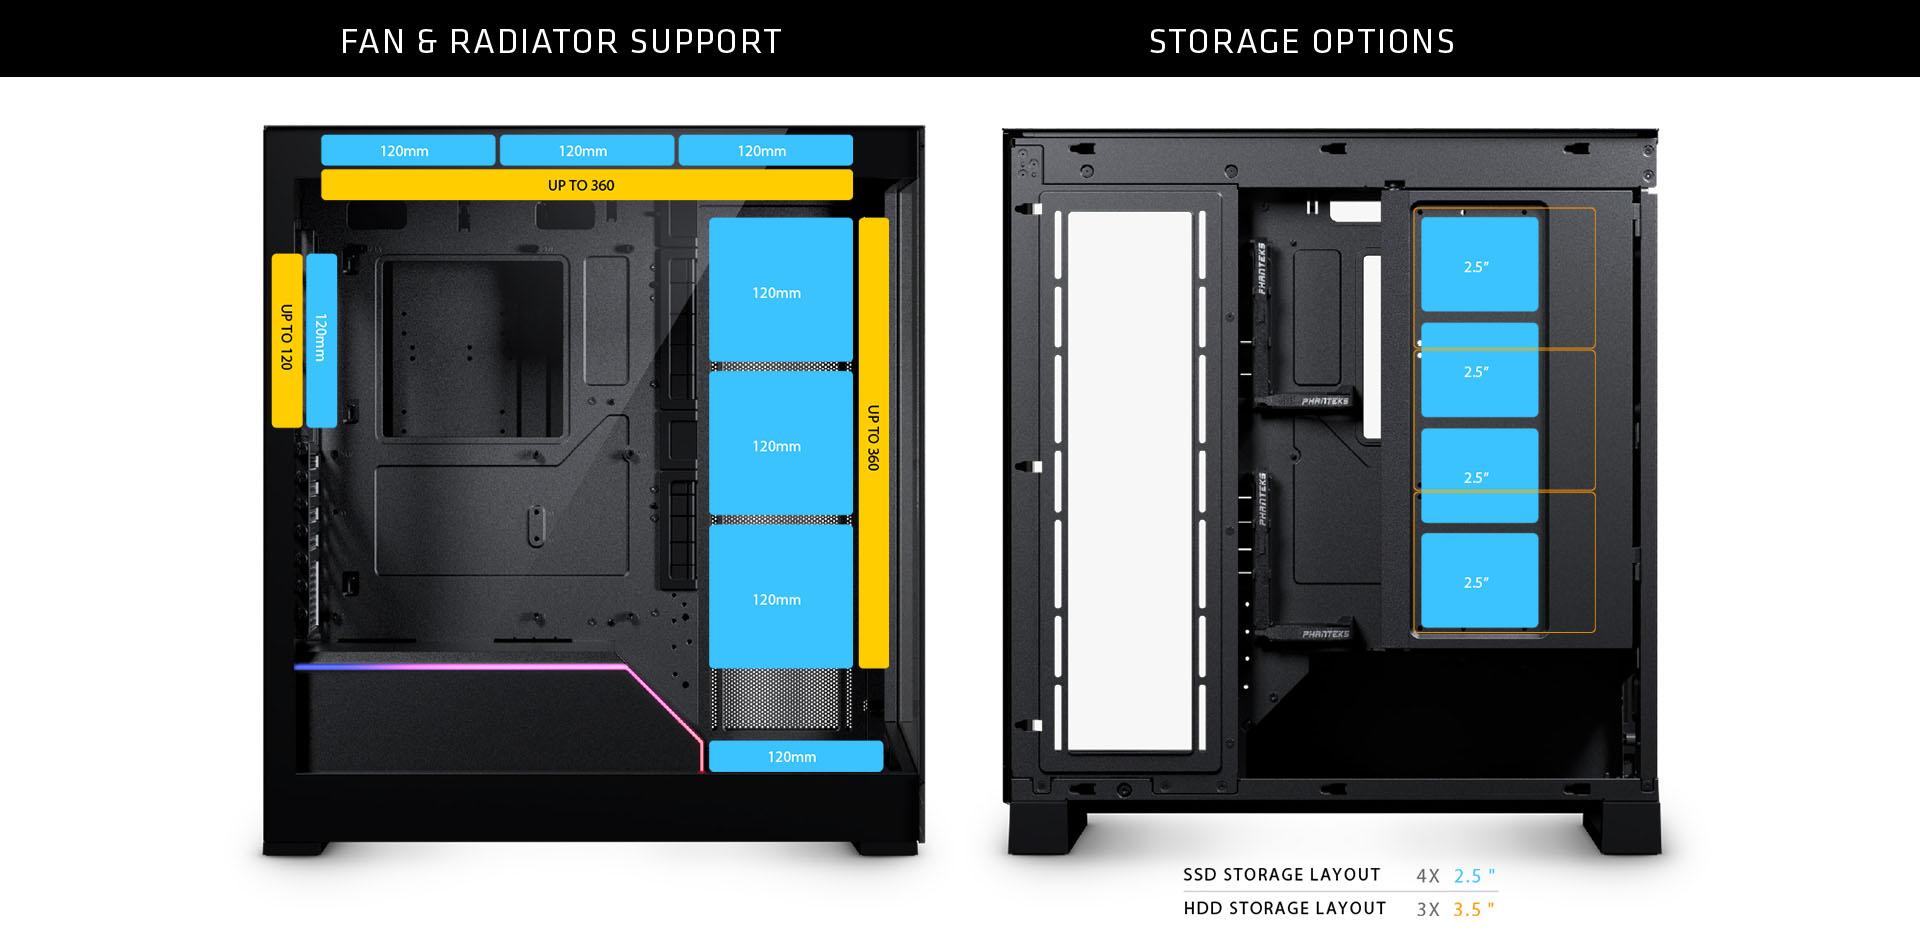 Fan Radiator Support and Storage Options